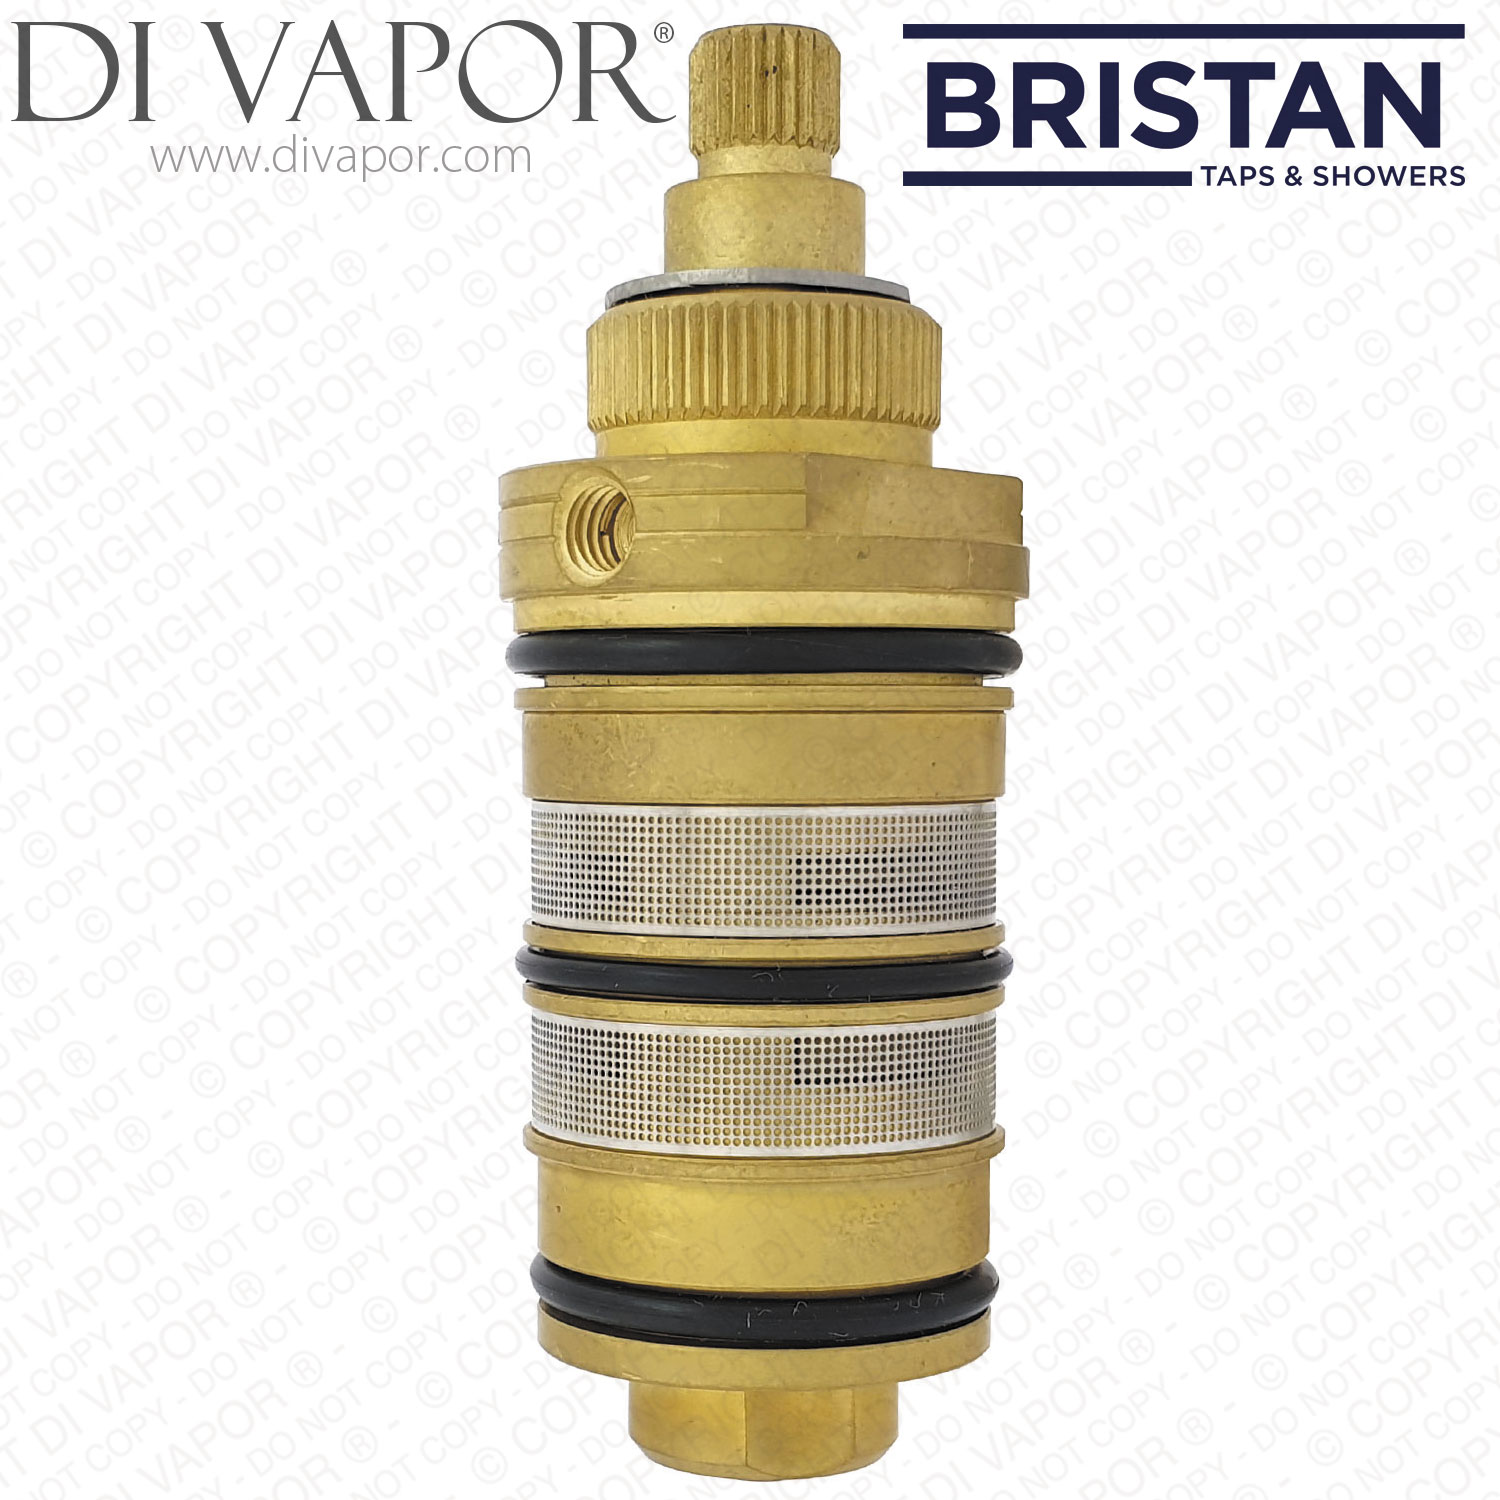 81E10004-000-001 Thermostatic Cartridge Replacement for Bristan Oval and Quadrato Shower Mixer Valves